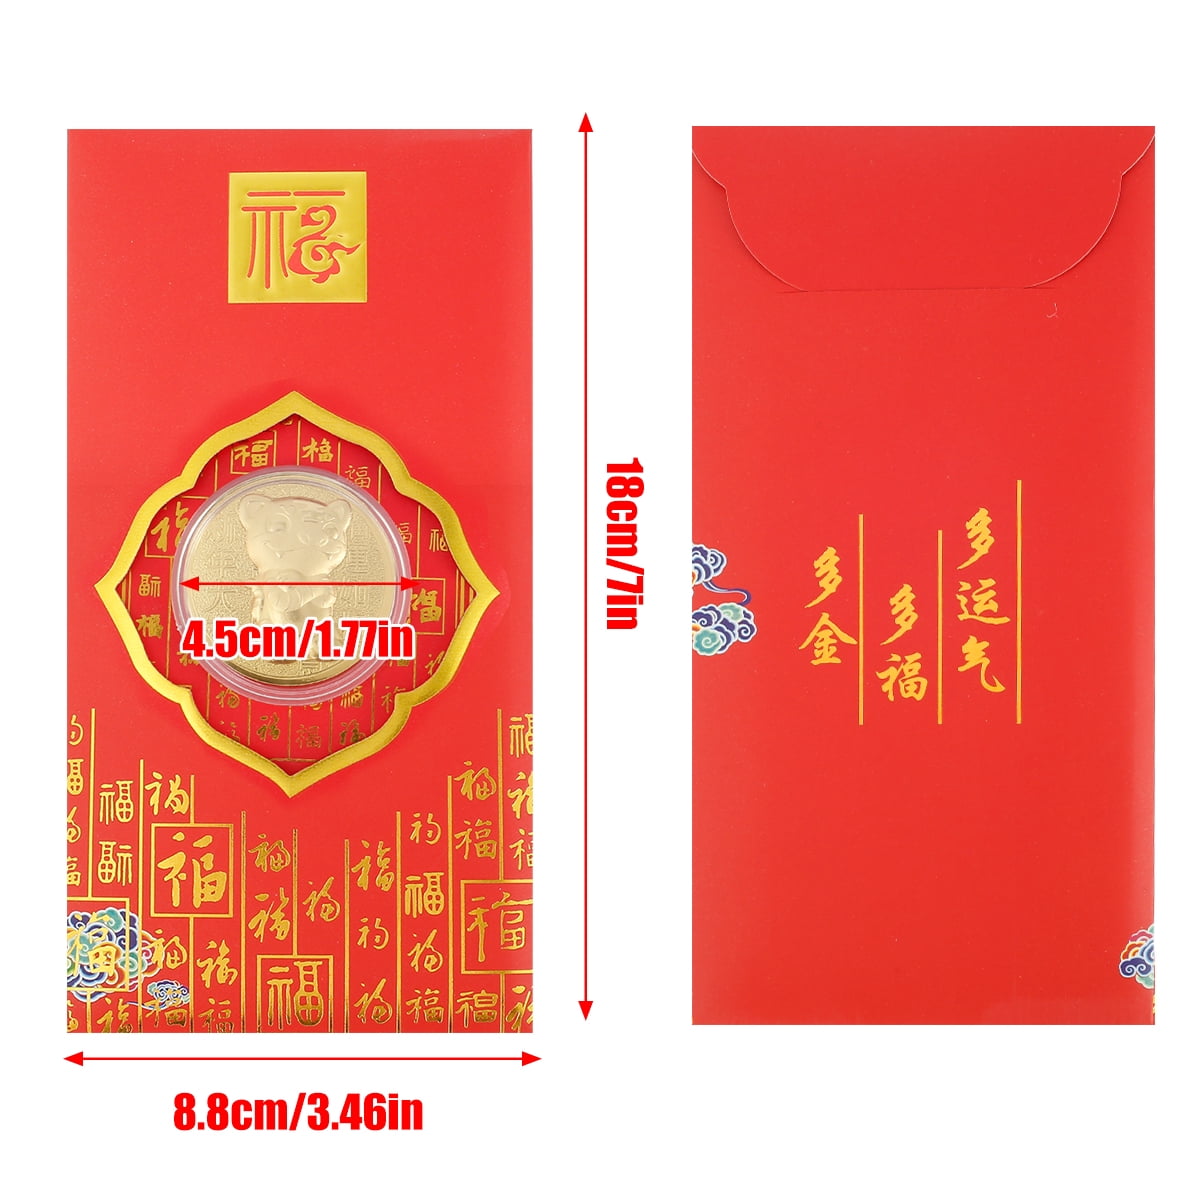 12 Pcs Chinese Red Envelopes,Thank You Cards,Cash Envelopes,Lucky Money Gift Envelopes Red Packet for Spring Festival,New Year,Birthday,Wedding,Baby